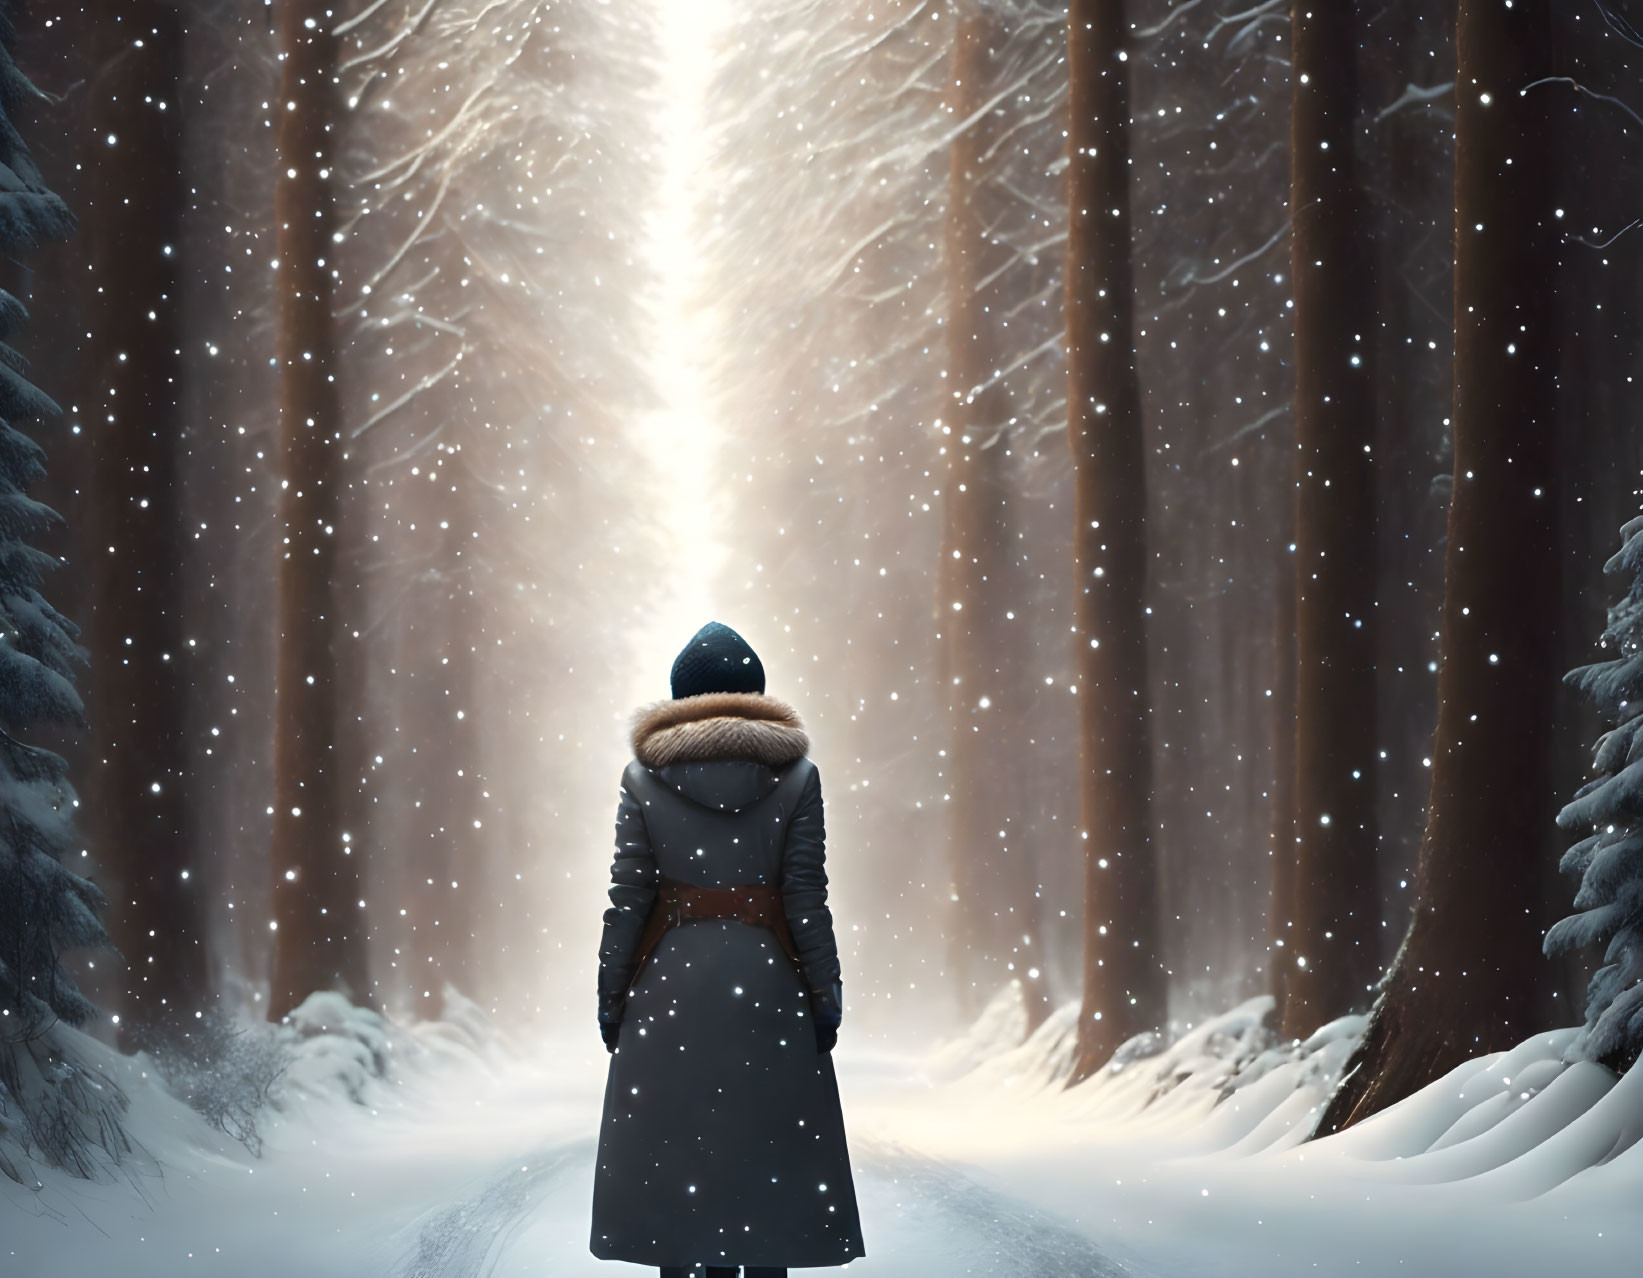 Person in Winter Coat on Snowy Forest Path with Falling Snowflakes